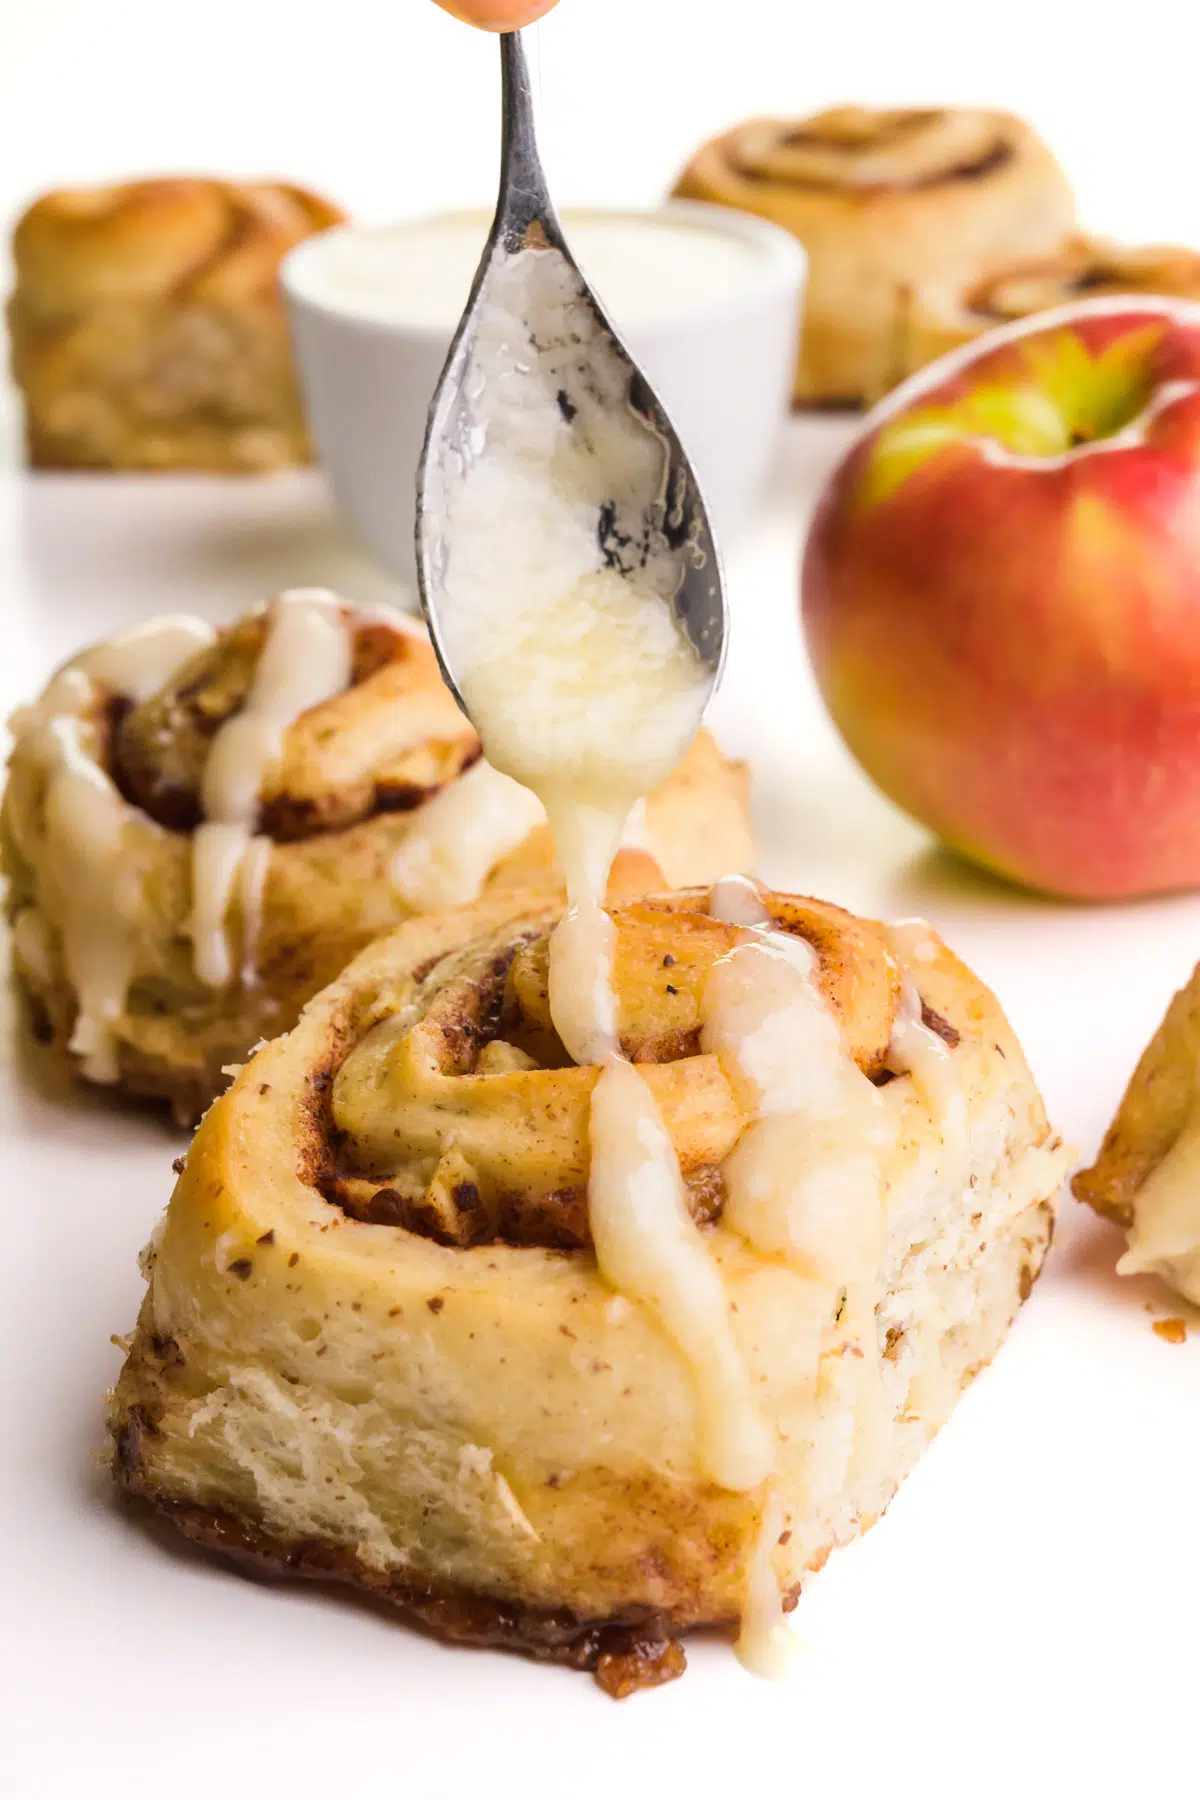 A spoon hovers over cinnamon rolls, drizzling icing on top. There is an apple and a bowl of icing in the background.